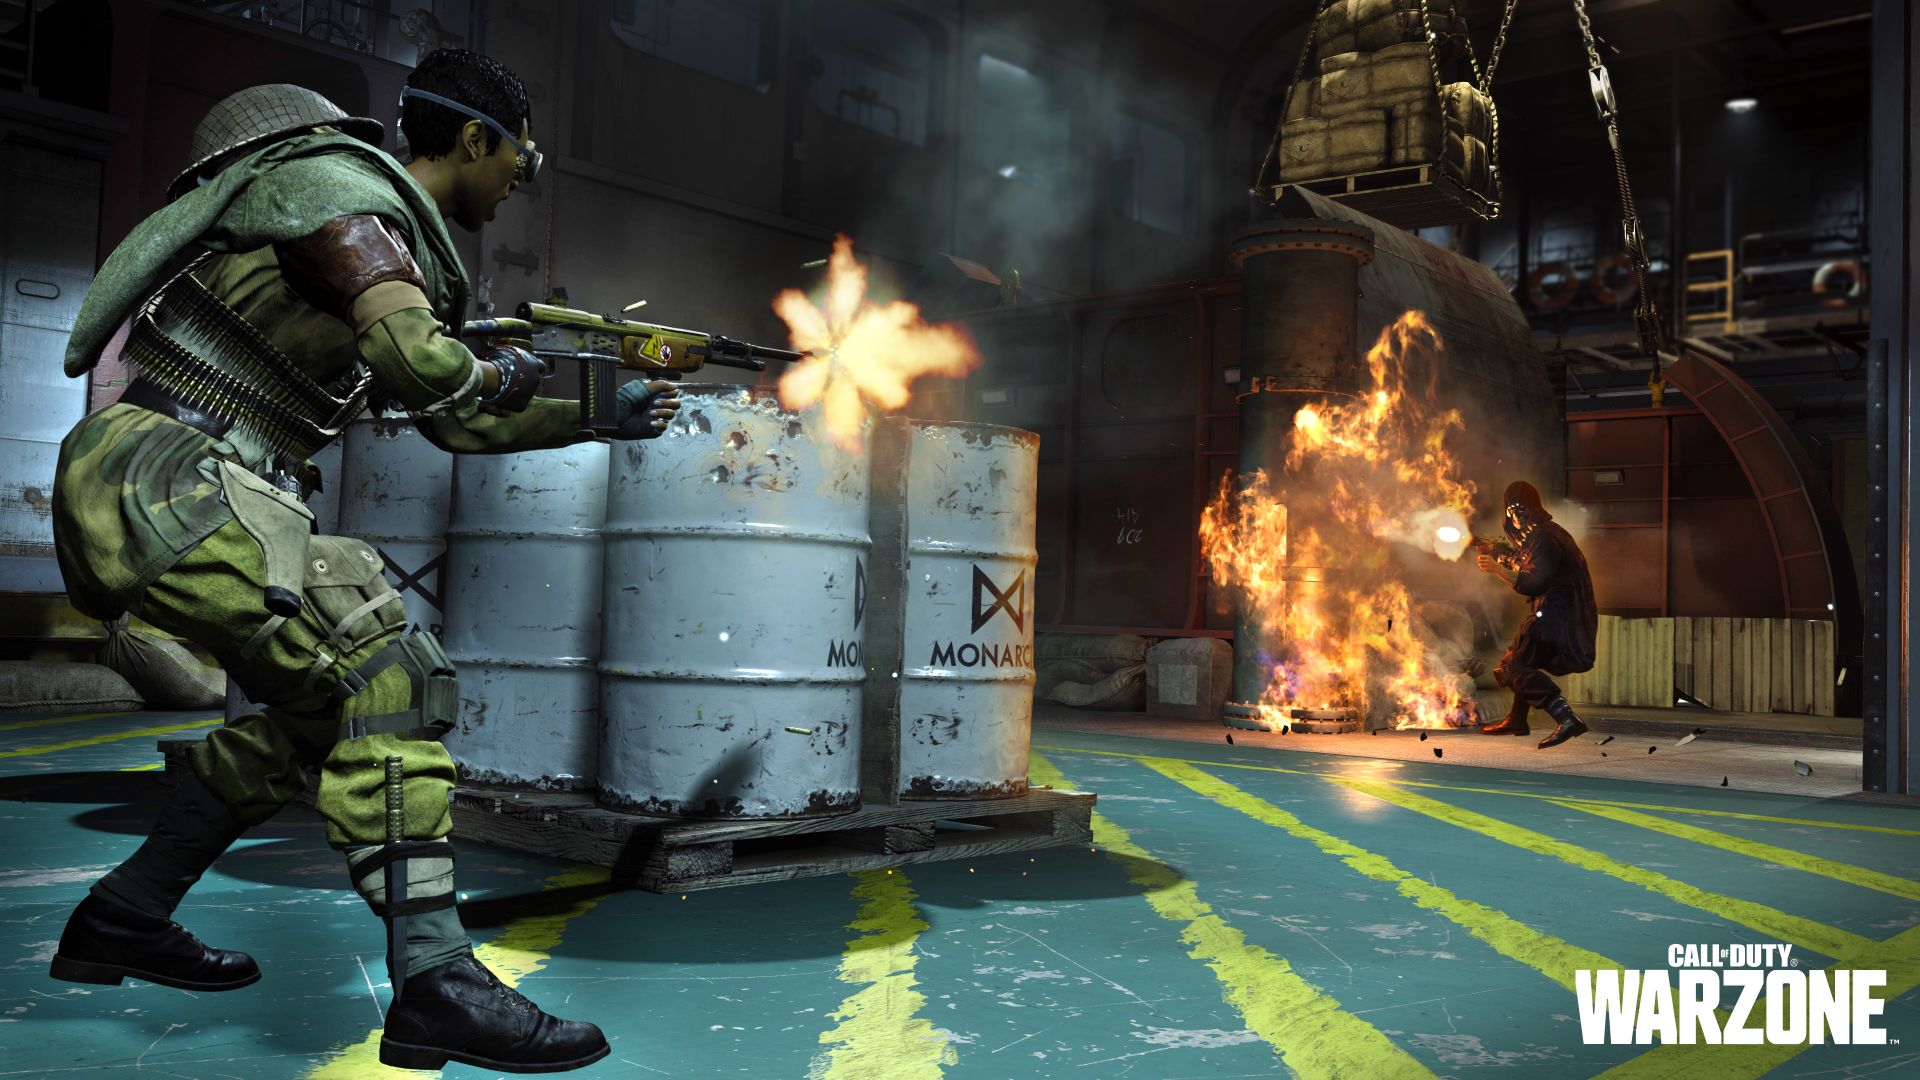 Season Three Brings Classified Arms to Call of Duty: Vanguard and Call of  Duty: Warzone - Xbox Wire